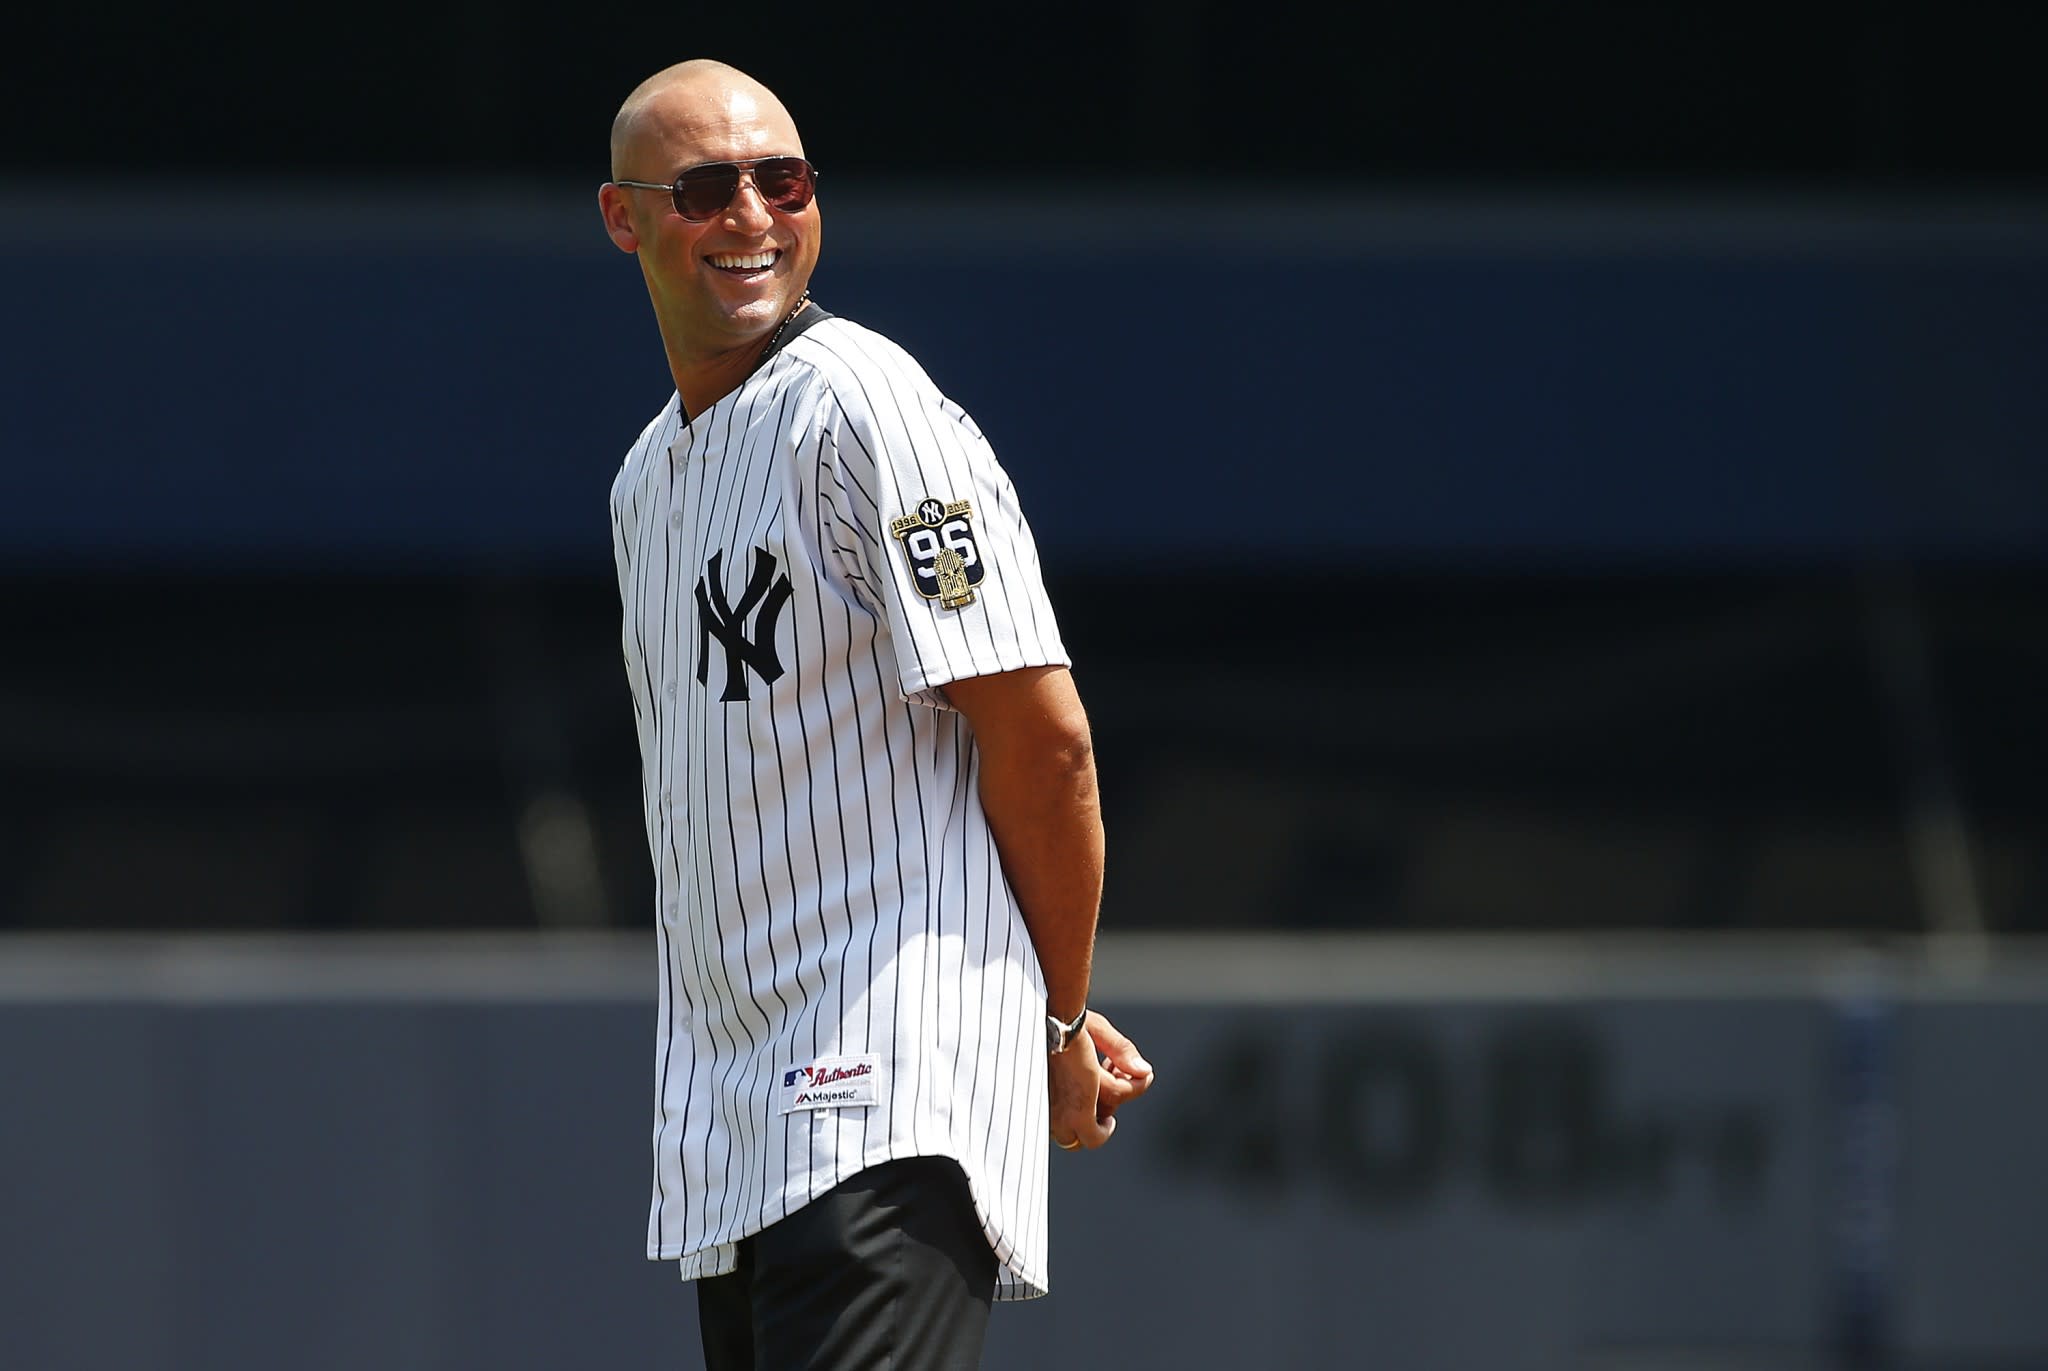 Derek Jeter is the perfect face and owner for the dysfunctional Miami Marlins2048 x 1371